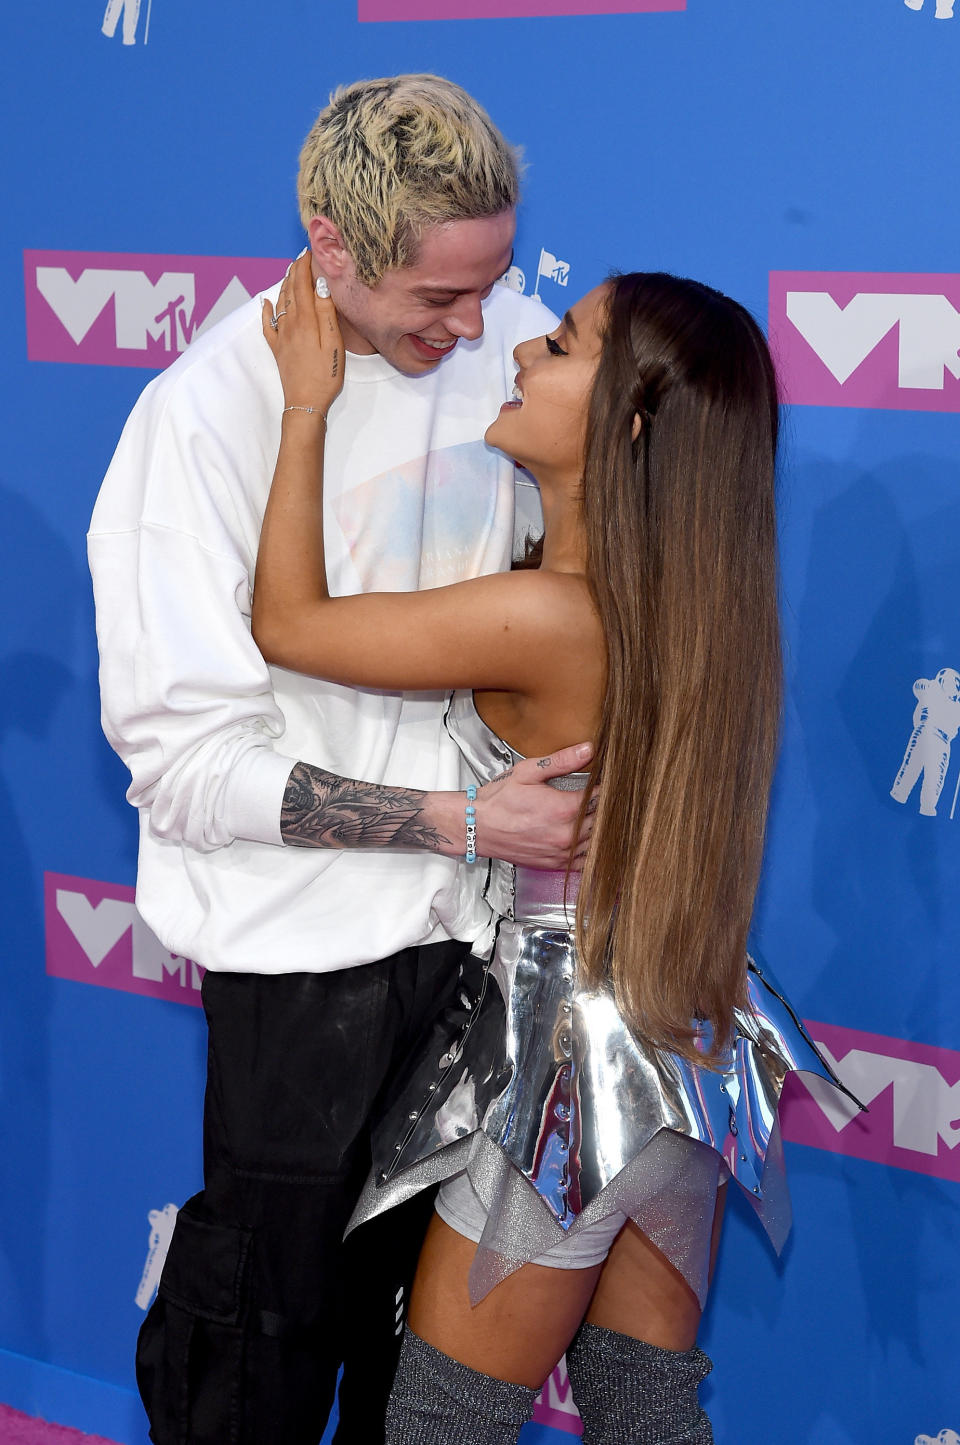 Pete Davidson and Ariana Grande post for the cameras at the 2018 MTV Video Music Awards. (Photo: Jamie McCarthy via Getty Images)